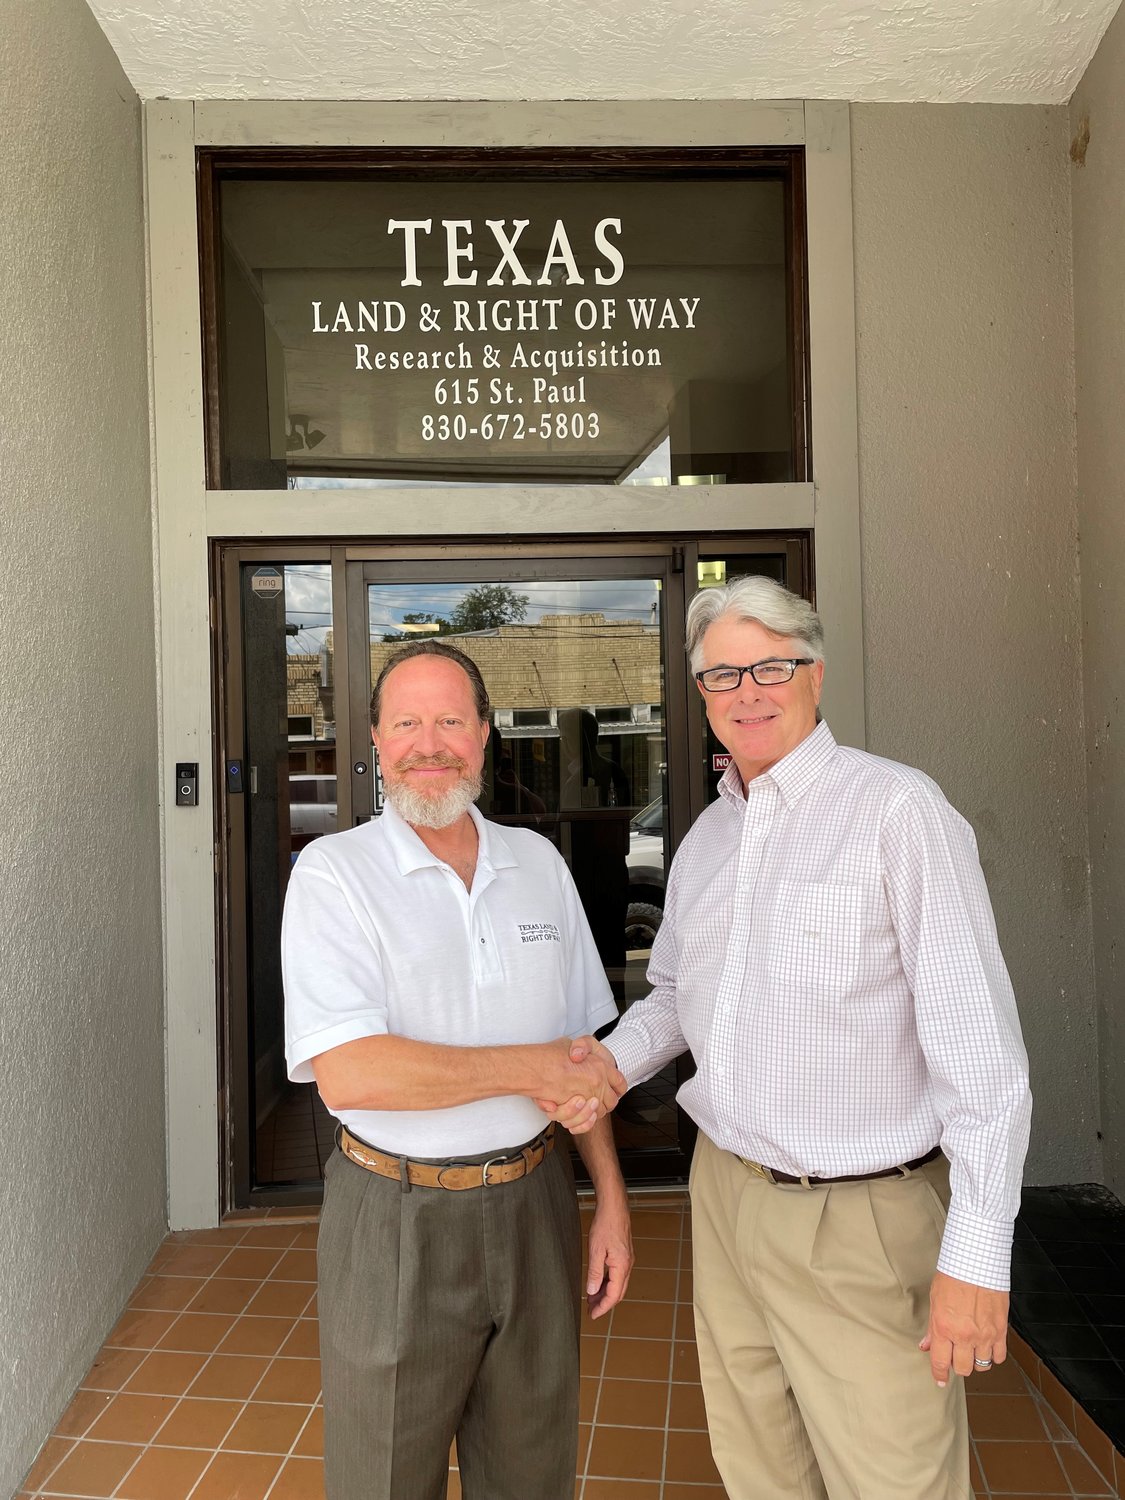 Rene de la Garza, left, will continue to serve as CEO of Texas Land & Right of Way LLC, while Rob Brown, who has opened Texas Land & Right of Way North in the Metroplex, will serve as president of the company.